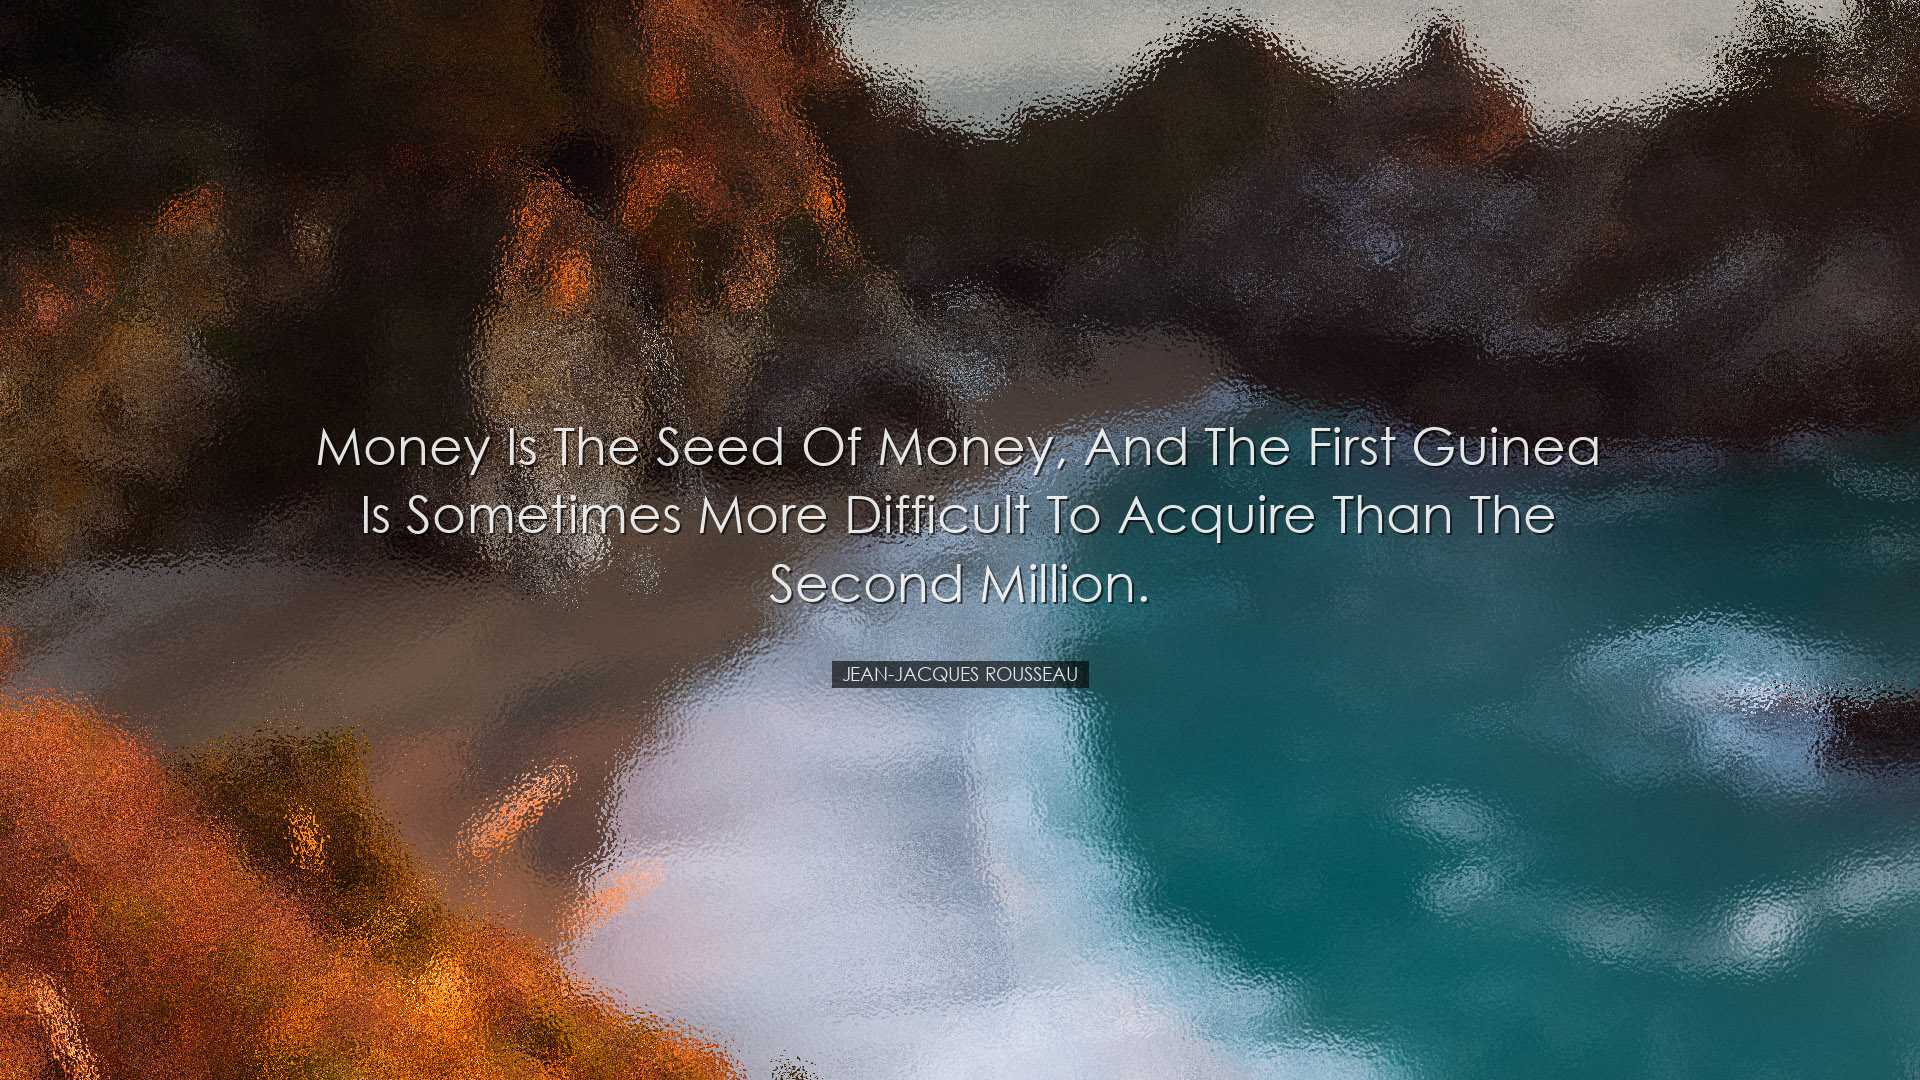 Money is the seed of money, and the first guinea is sometimes more